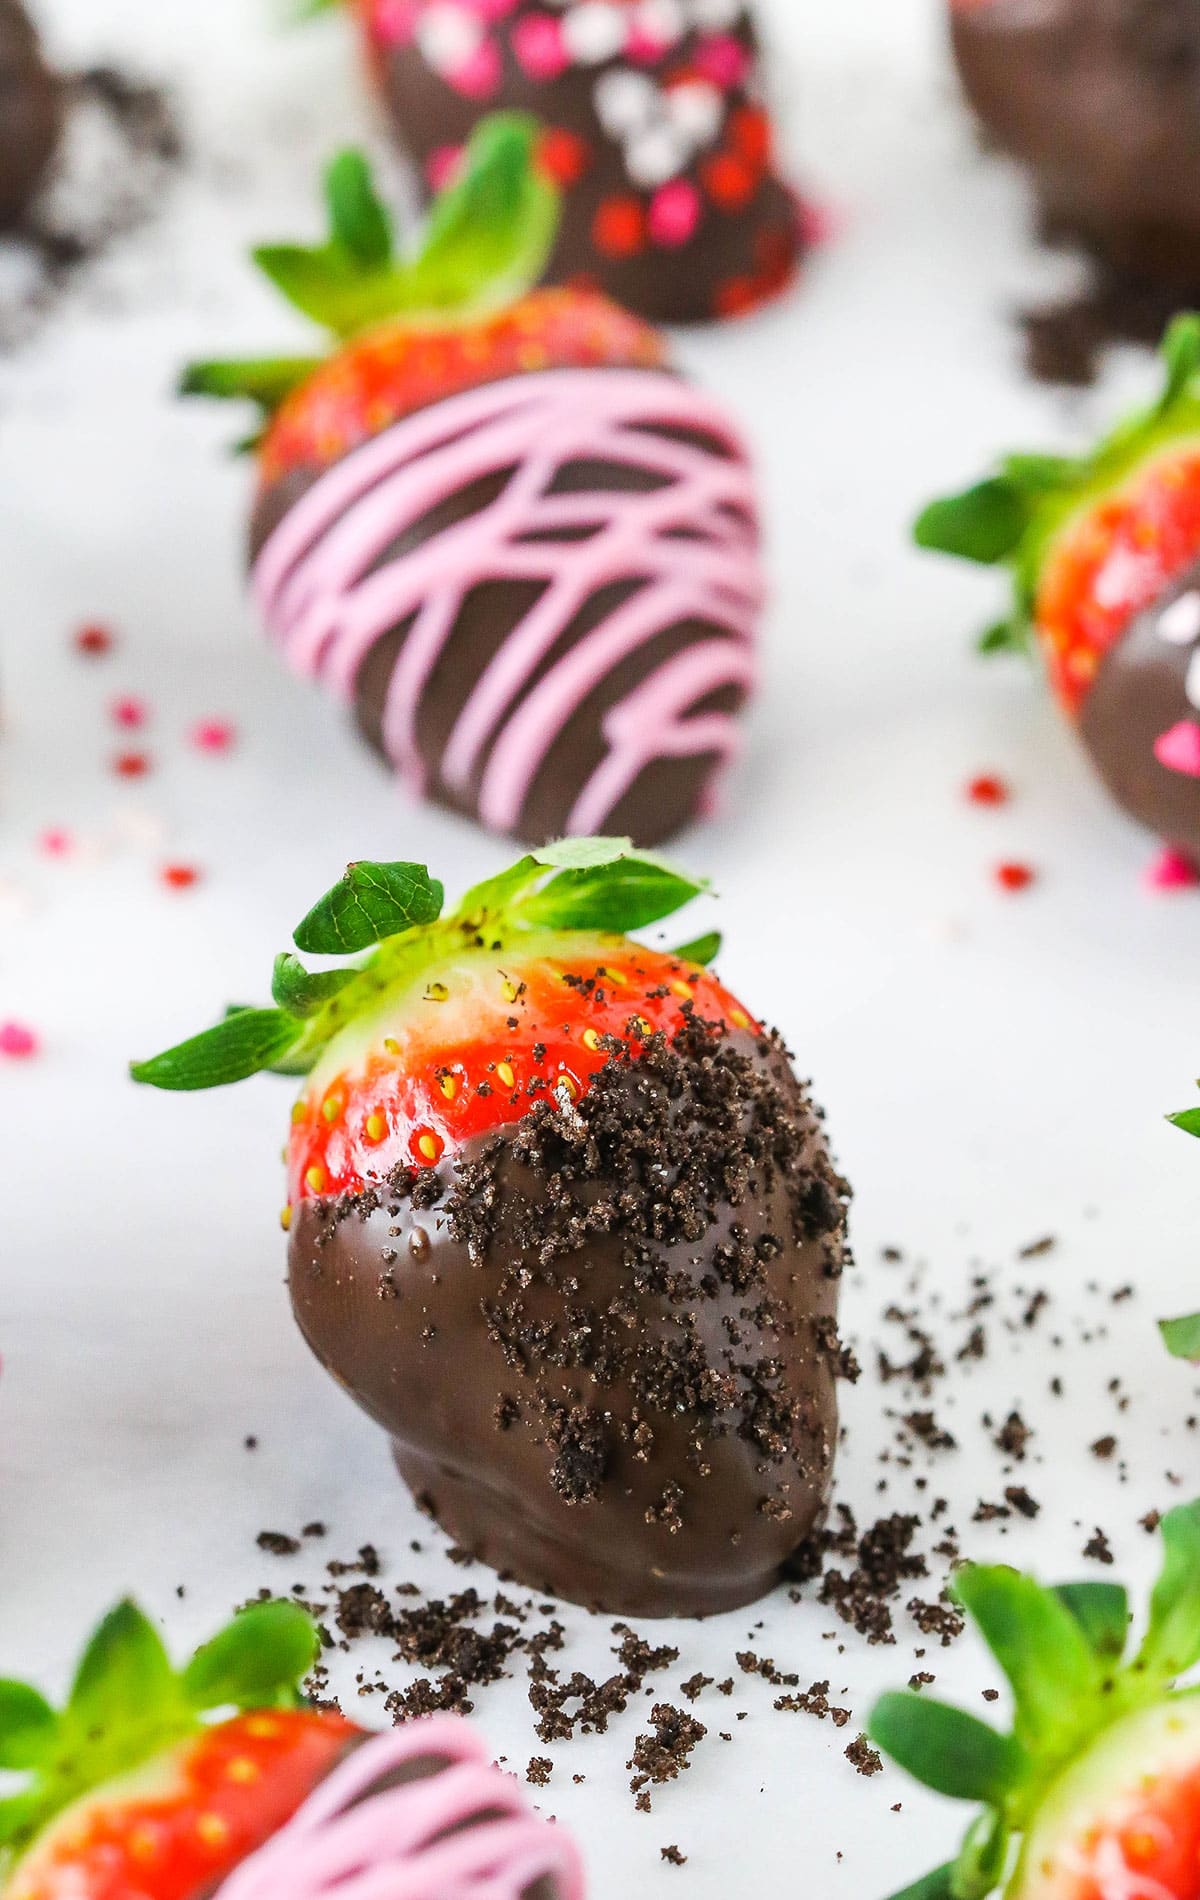 Chocolate Covered Strawberries spread out on a white table top and decorated with pink frosting or red, white and pink sprinkles